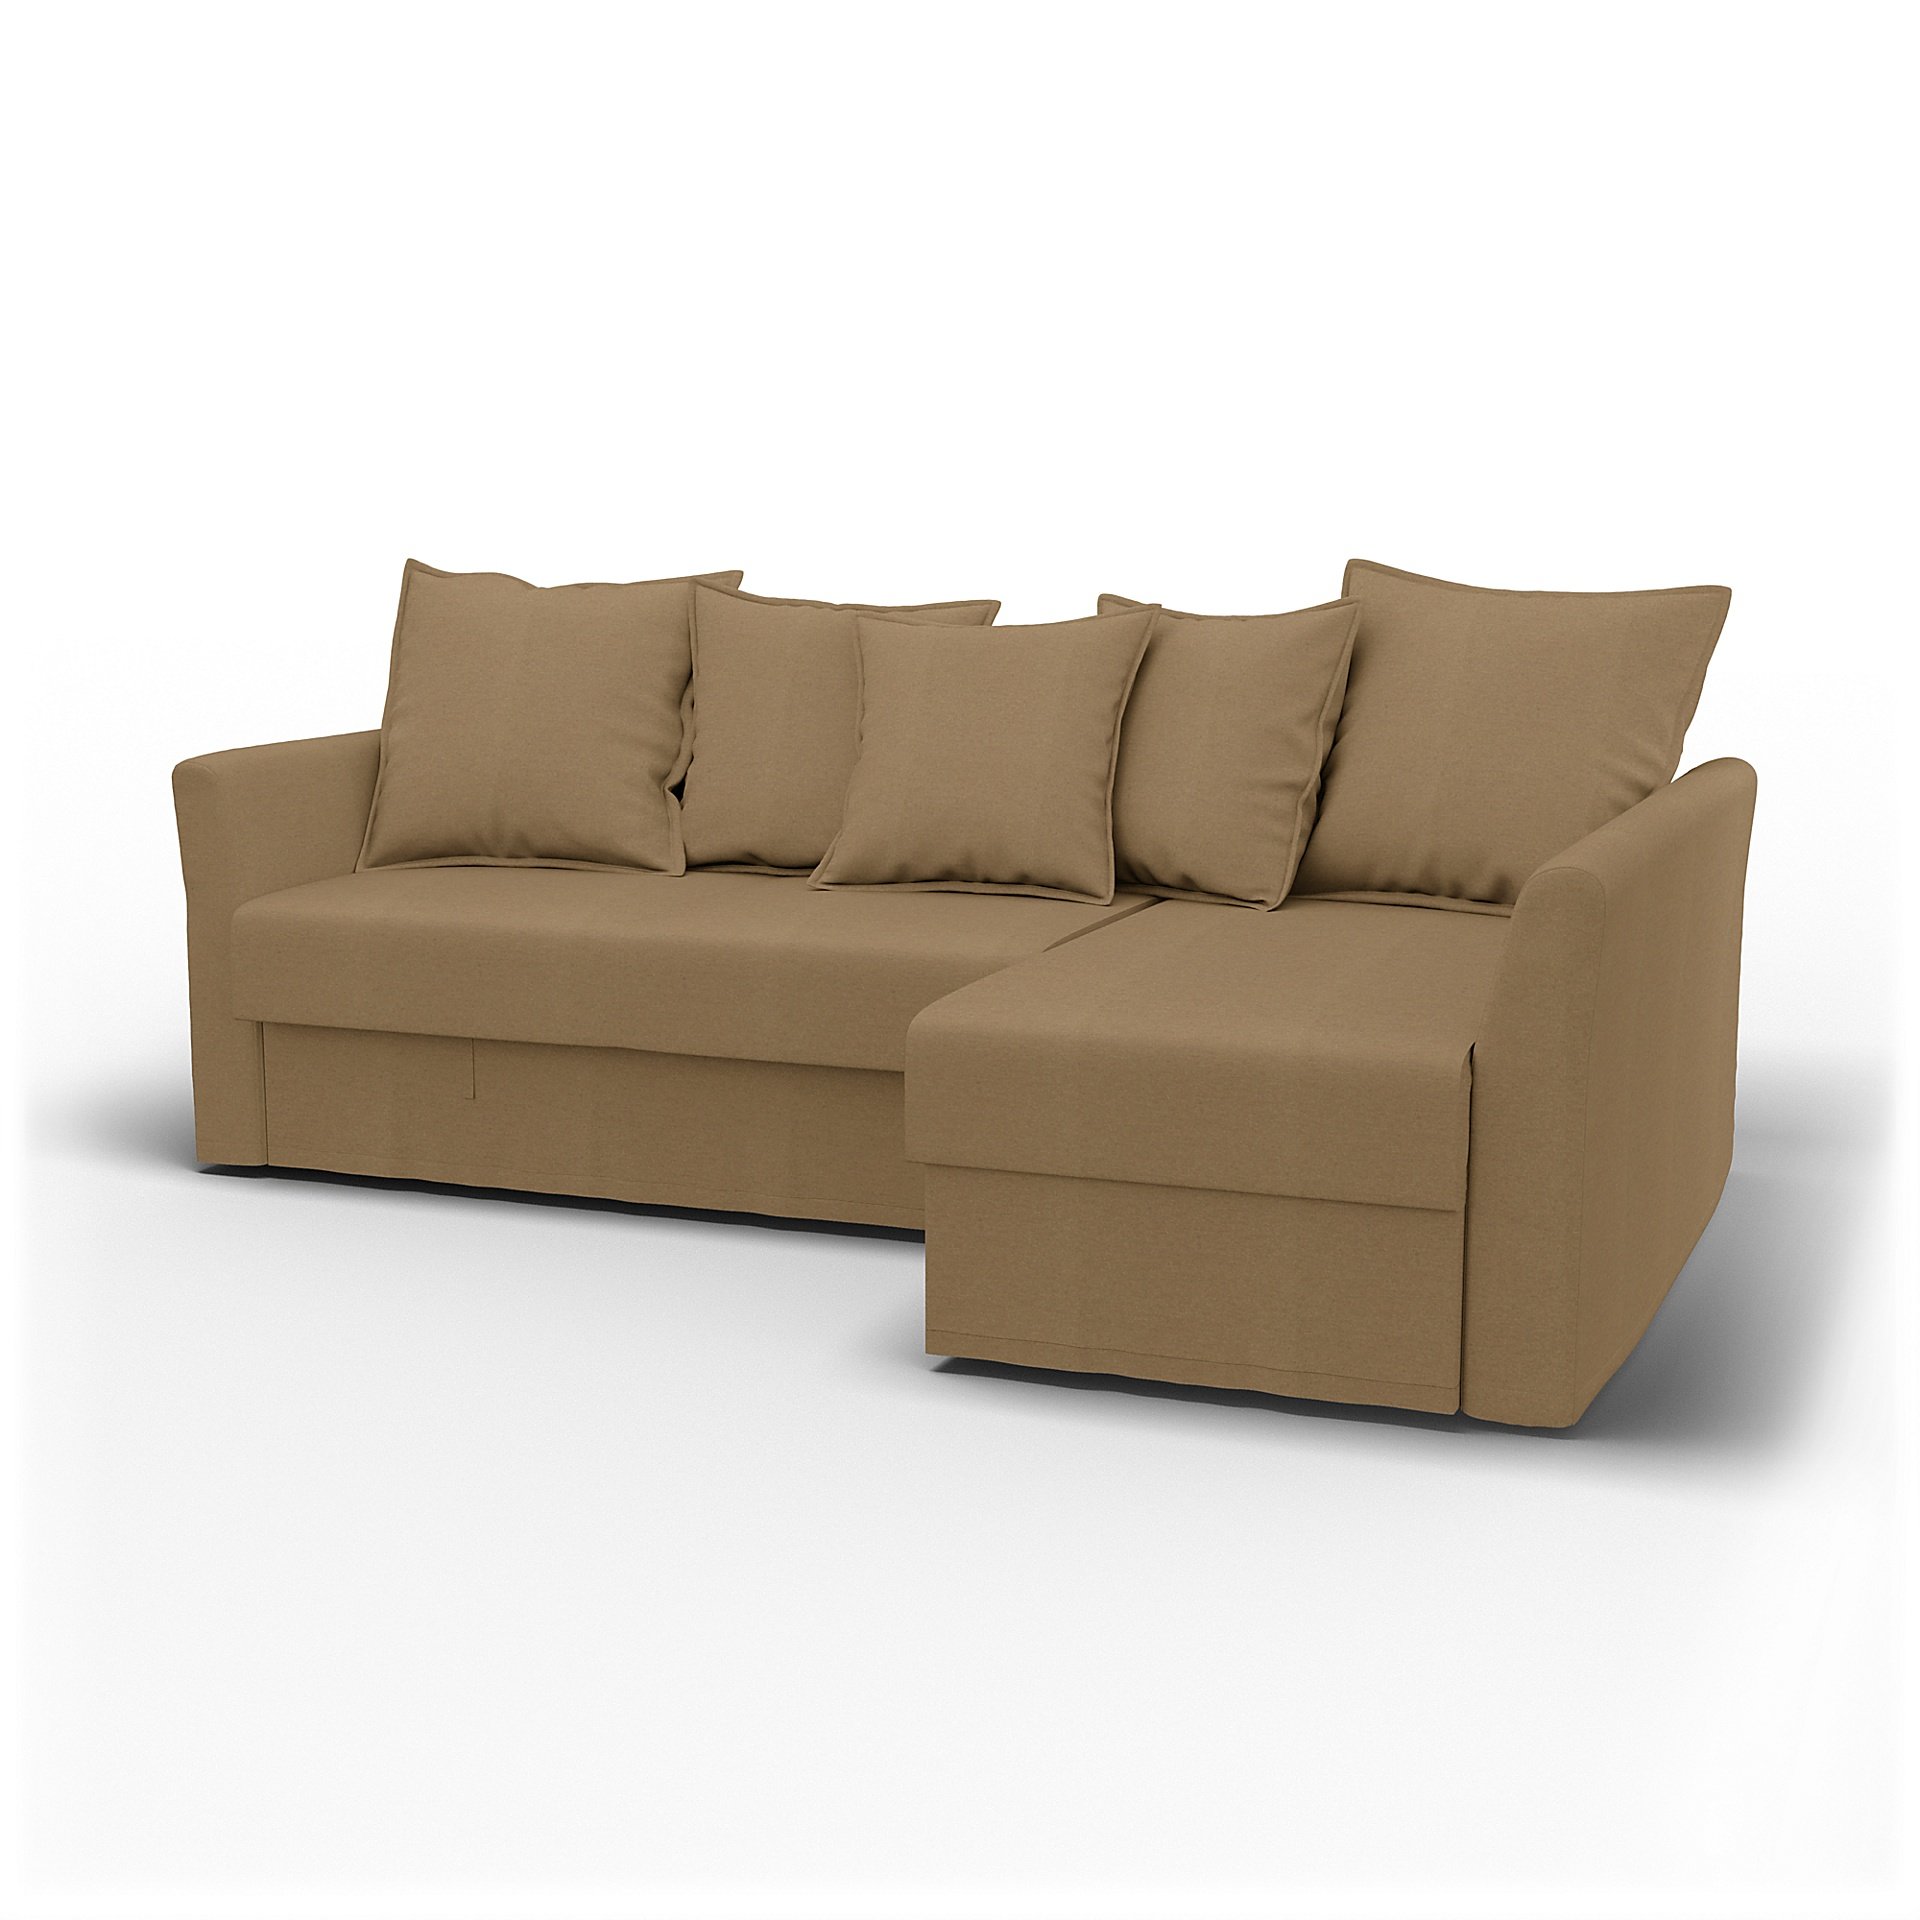 IKEA - Holmsund Sofabed with Chaiselongue, Sand, Wool - Bemz